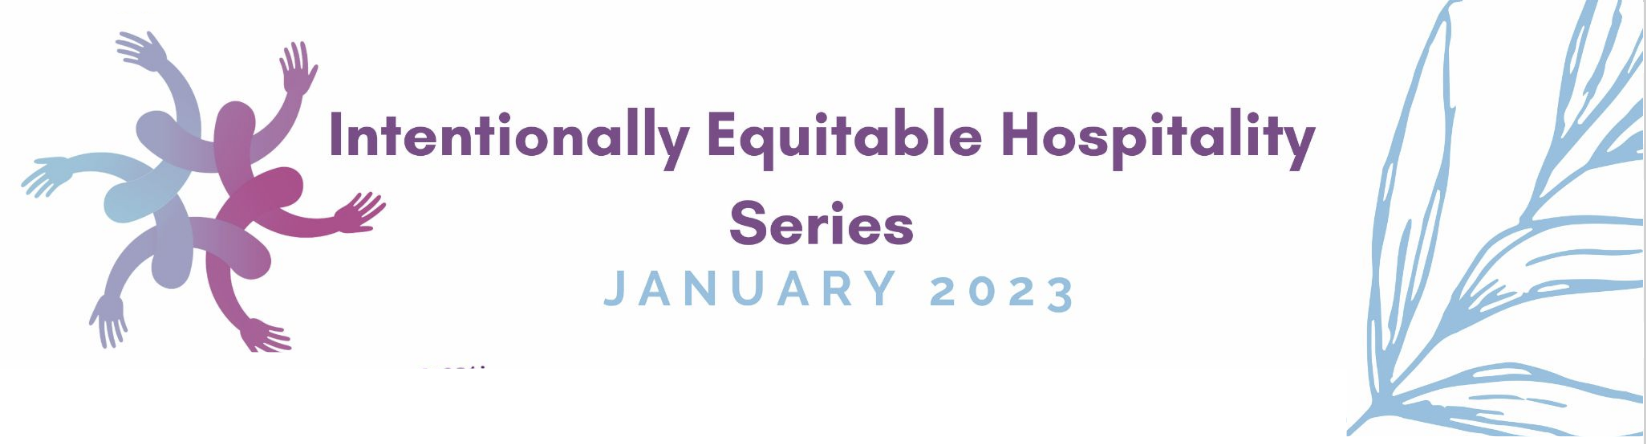 Screenshot of the title of the workshops I'm participating in: Intentionally Equitable Hospitality Series, January 2023